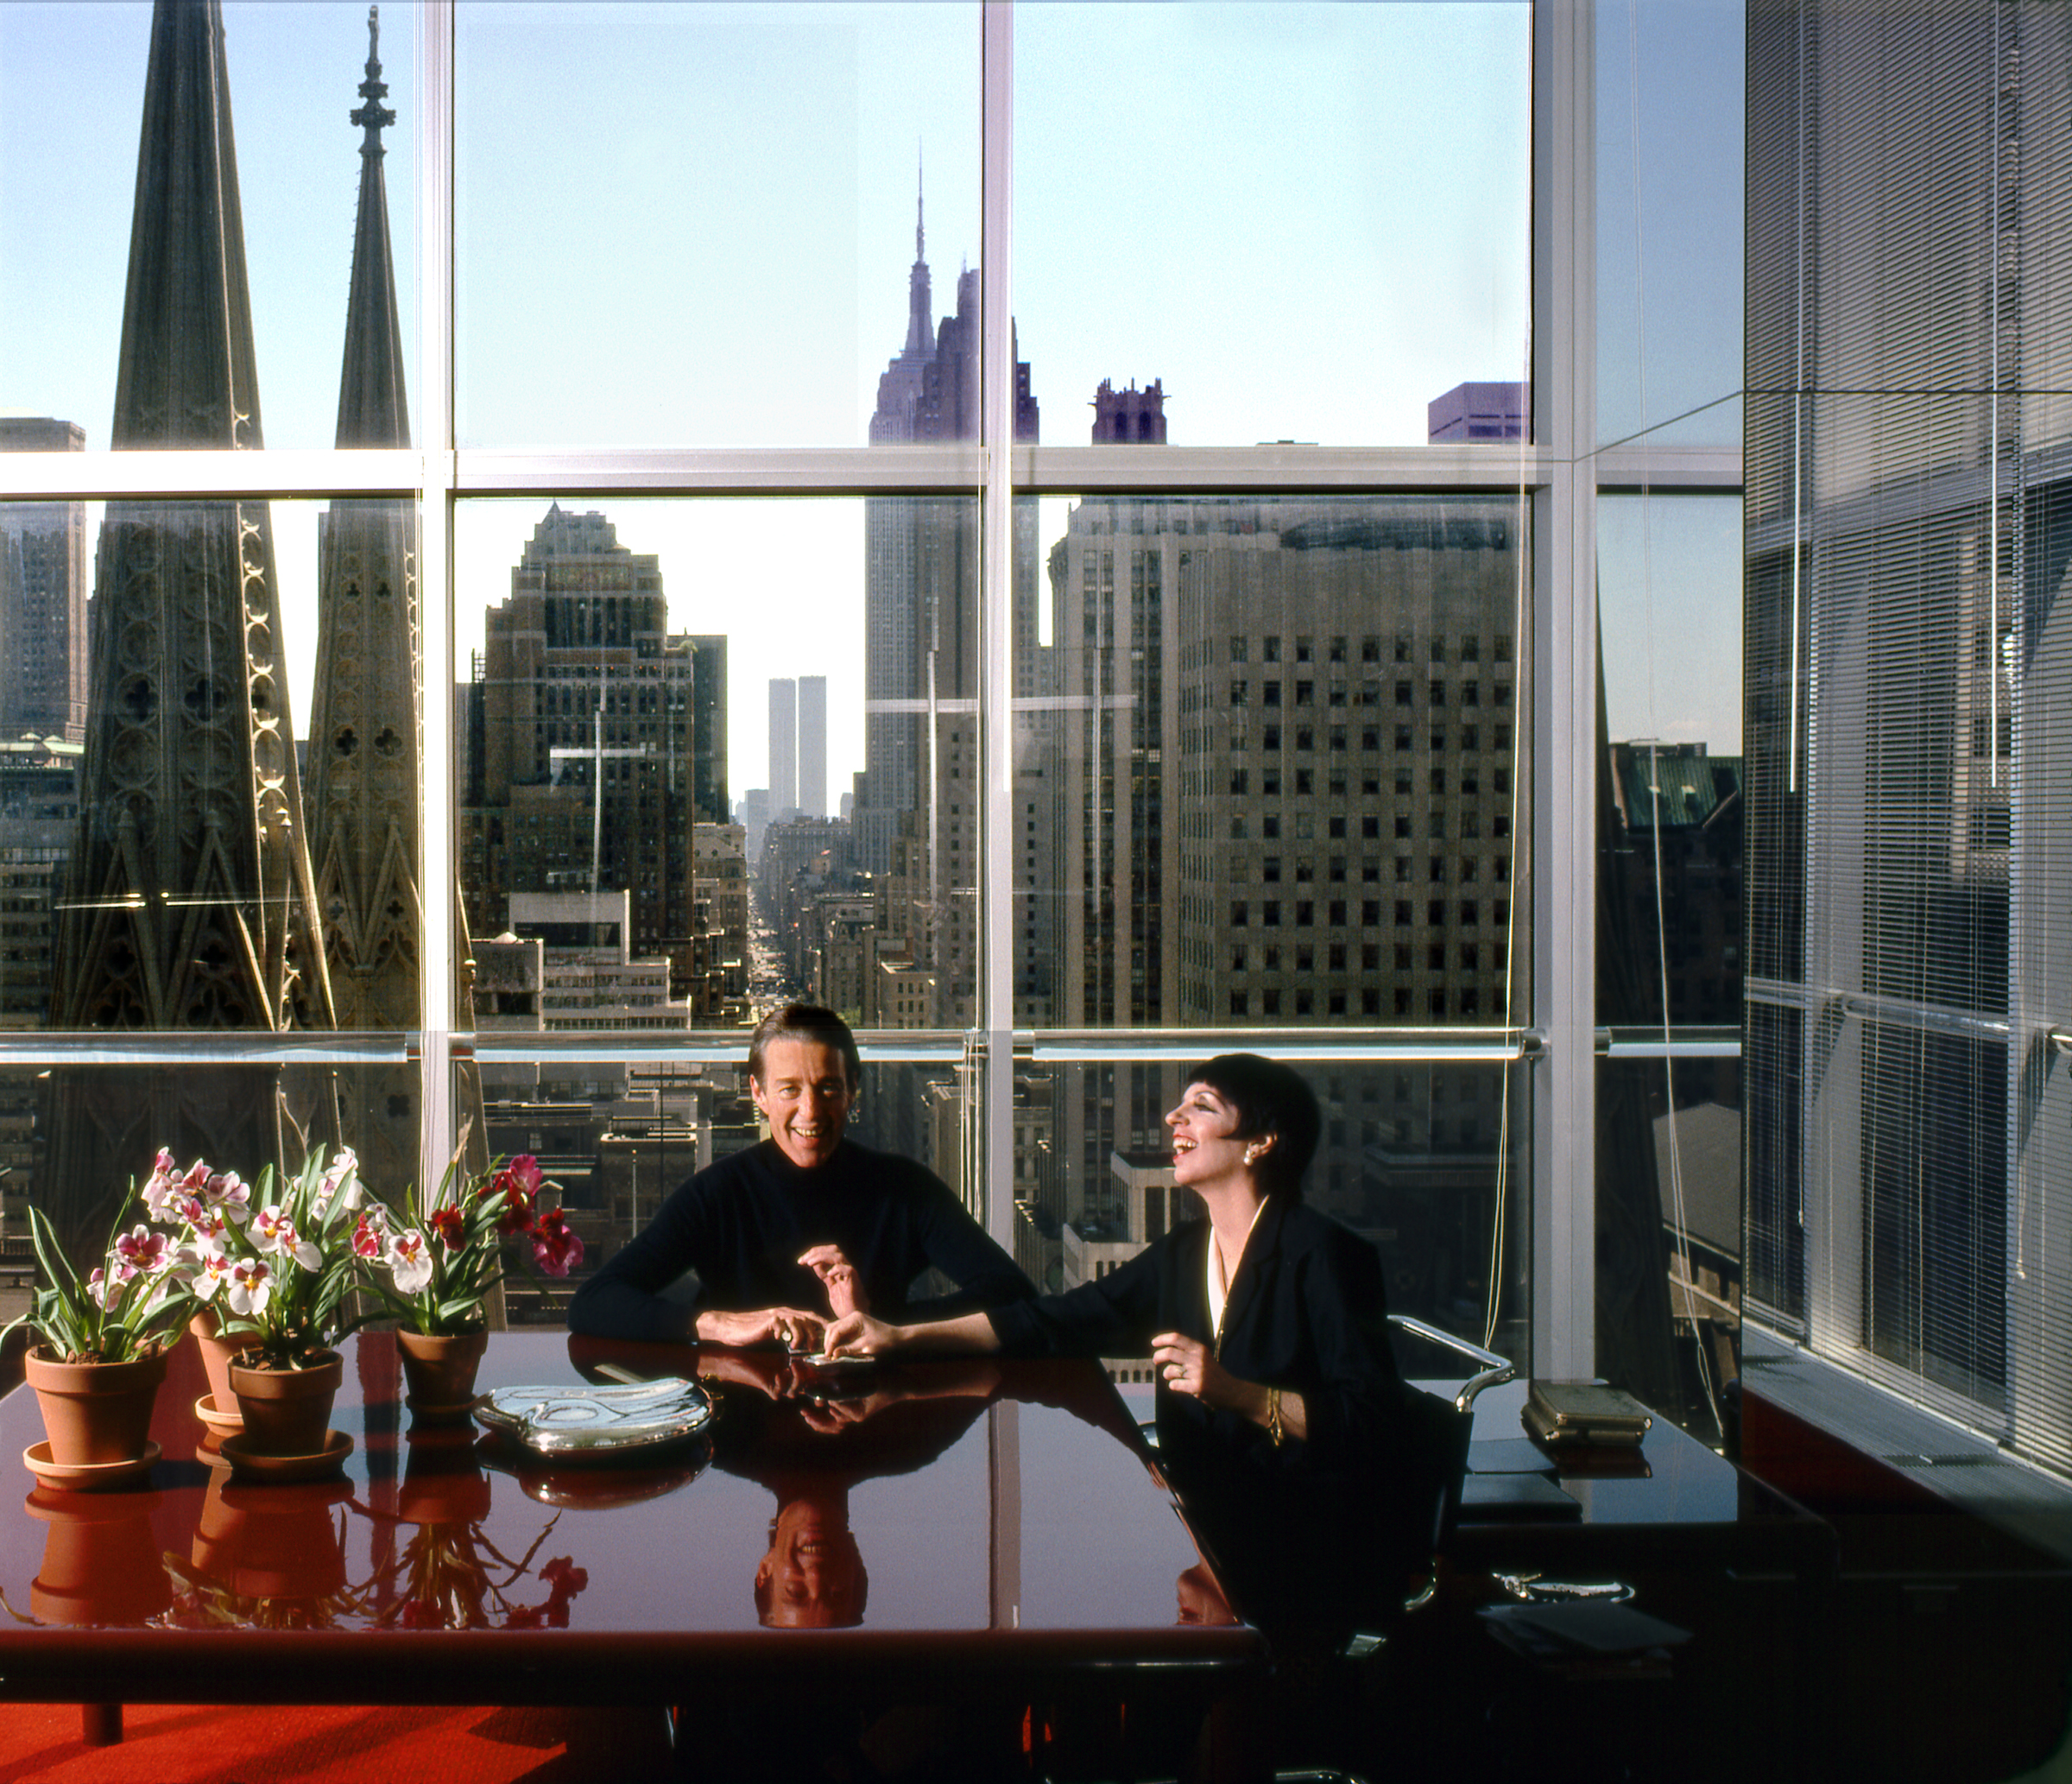 Liza Minnelli and Halston in NYC, 1978 by Harry Benson